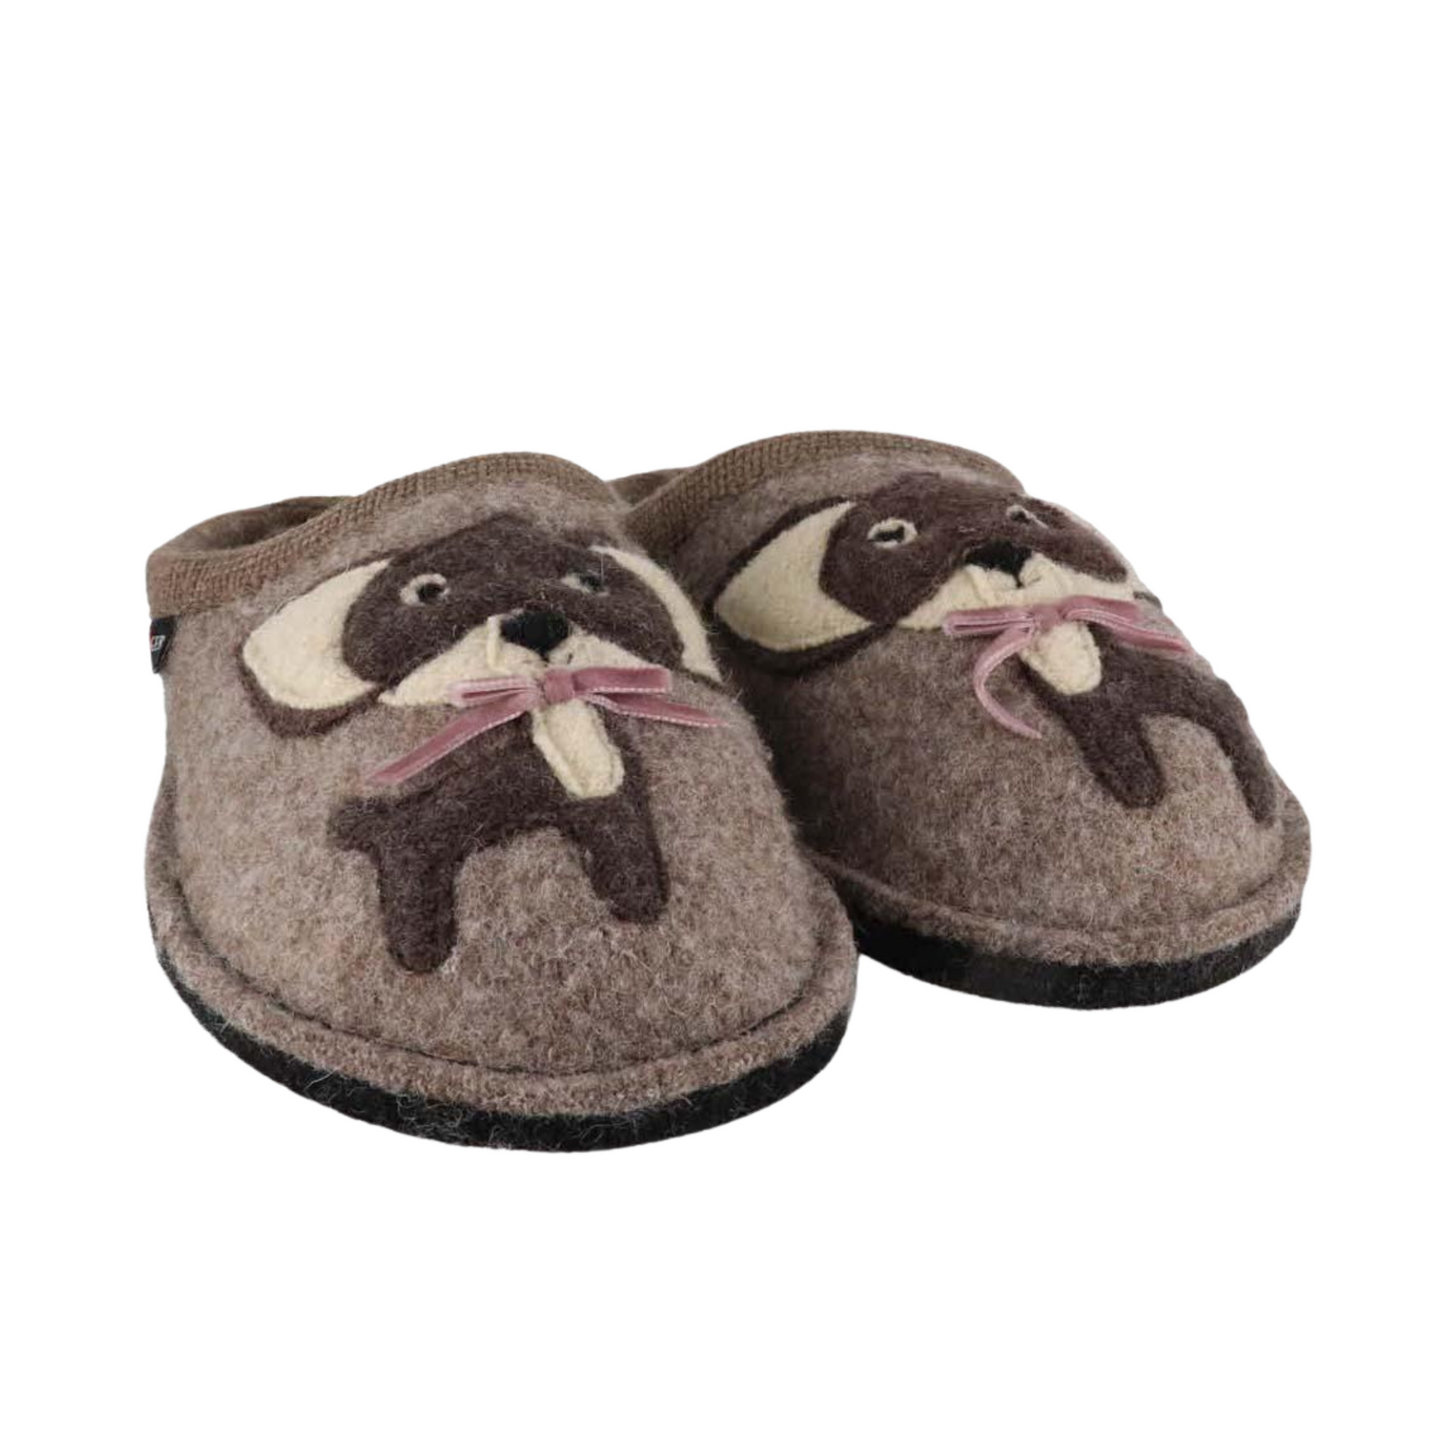 Two tan coloured wool slippers with chihuahua designs on the front.